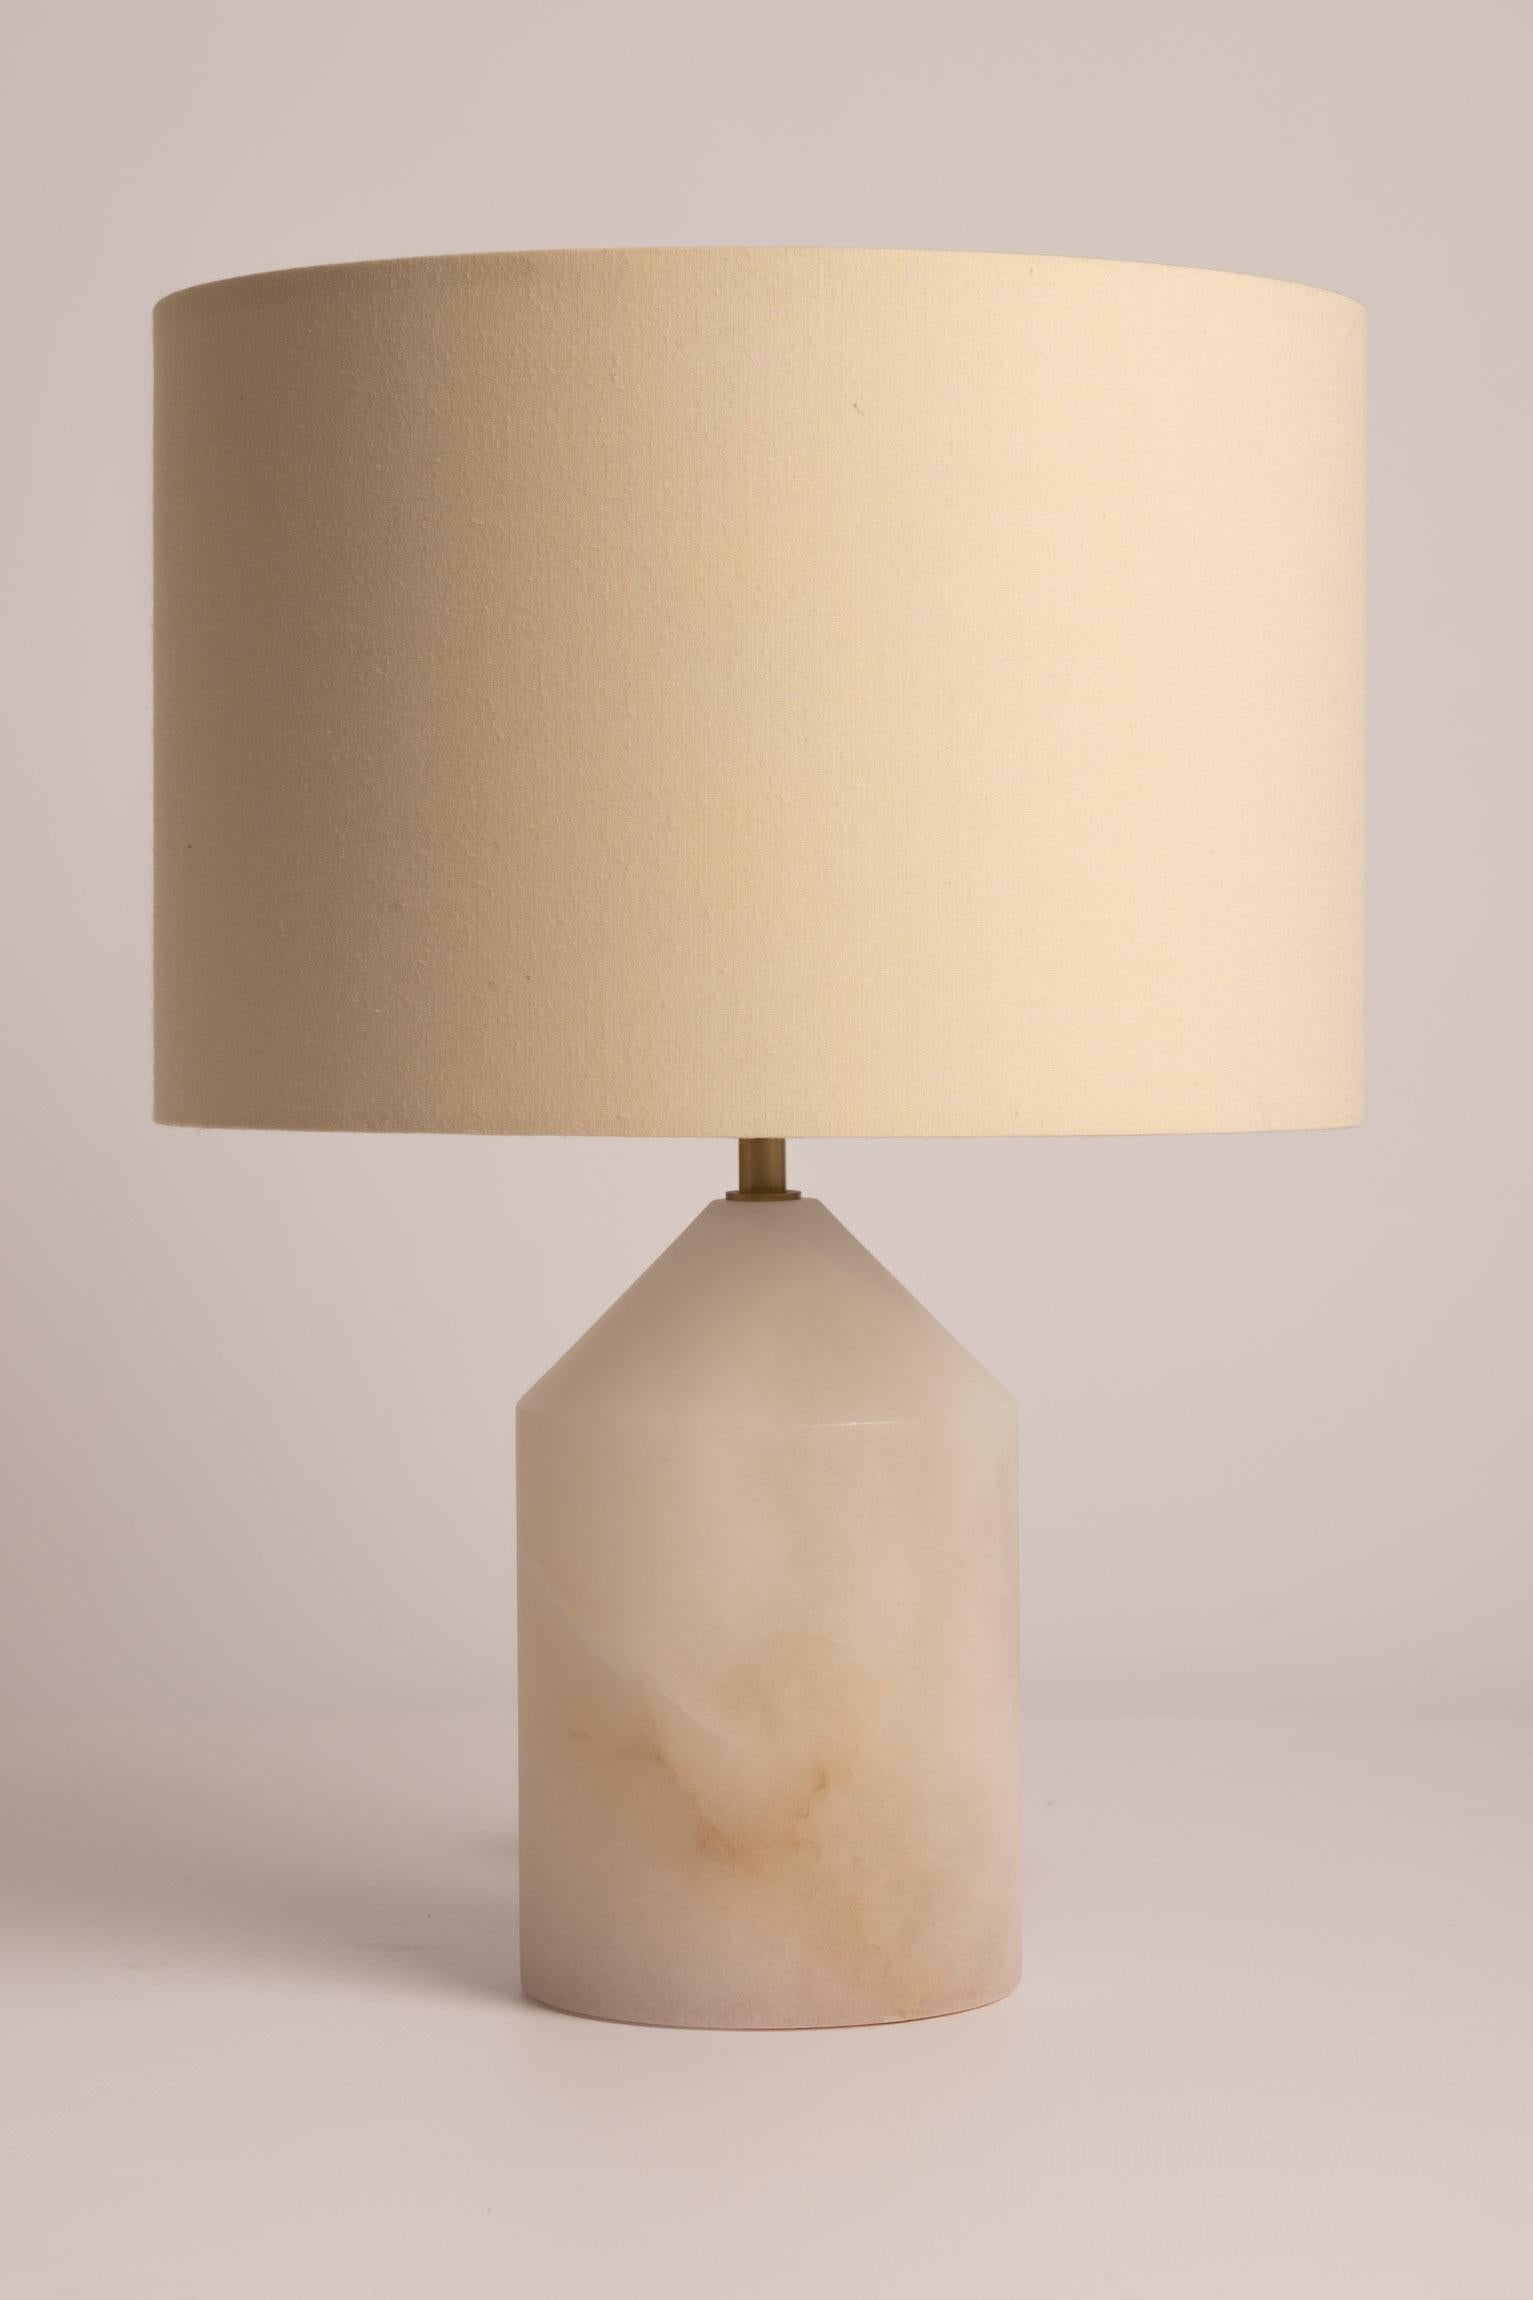 White Alabaster Josef Table Lamp by Simone & Marcel
Dimensions: Ø 30 x H 41.5 cm.
Materials: Brass, cotton and white alabaster.

Also available in different marble, wood and alabaster options and finishes. Custom options available on request. Please